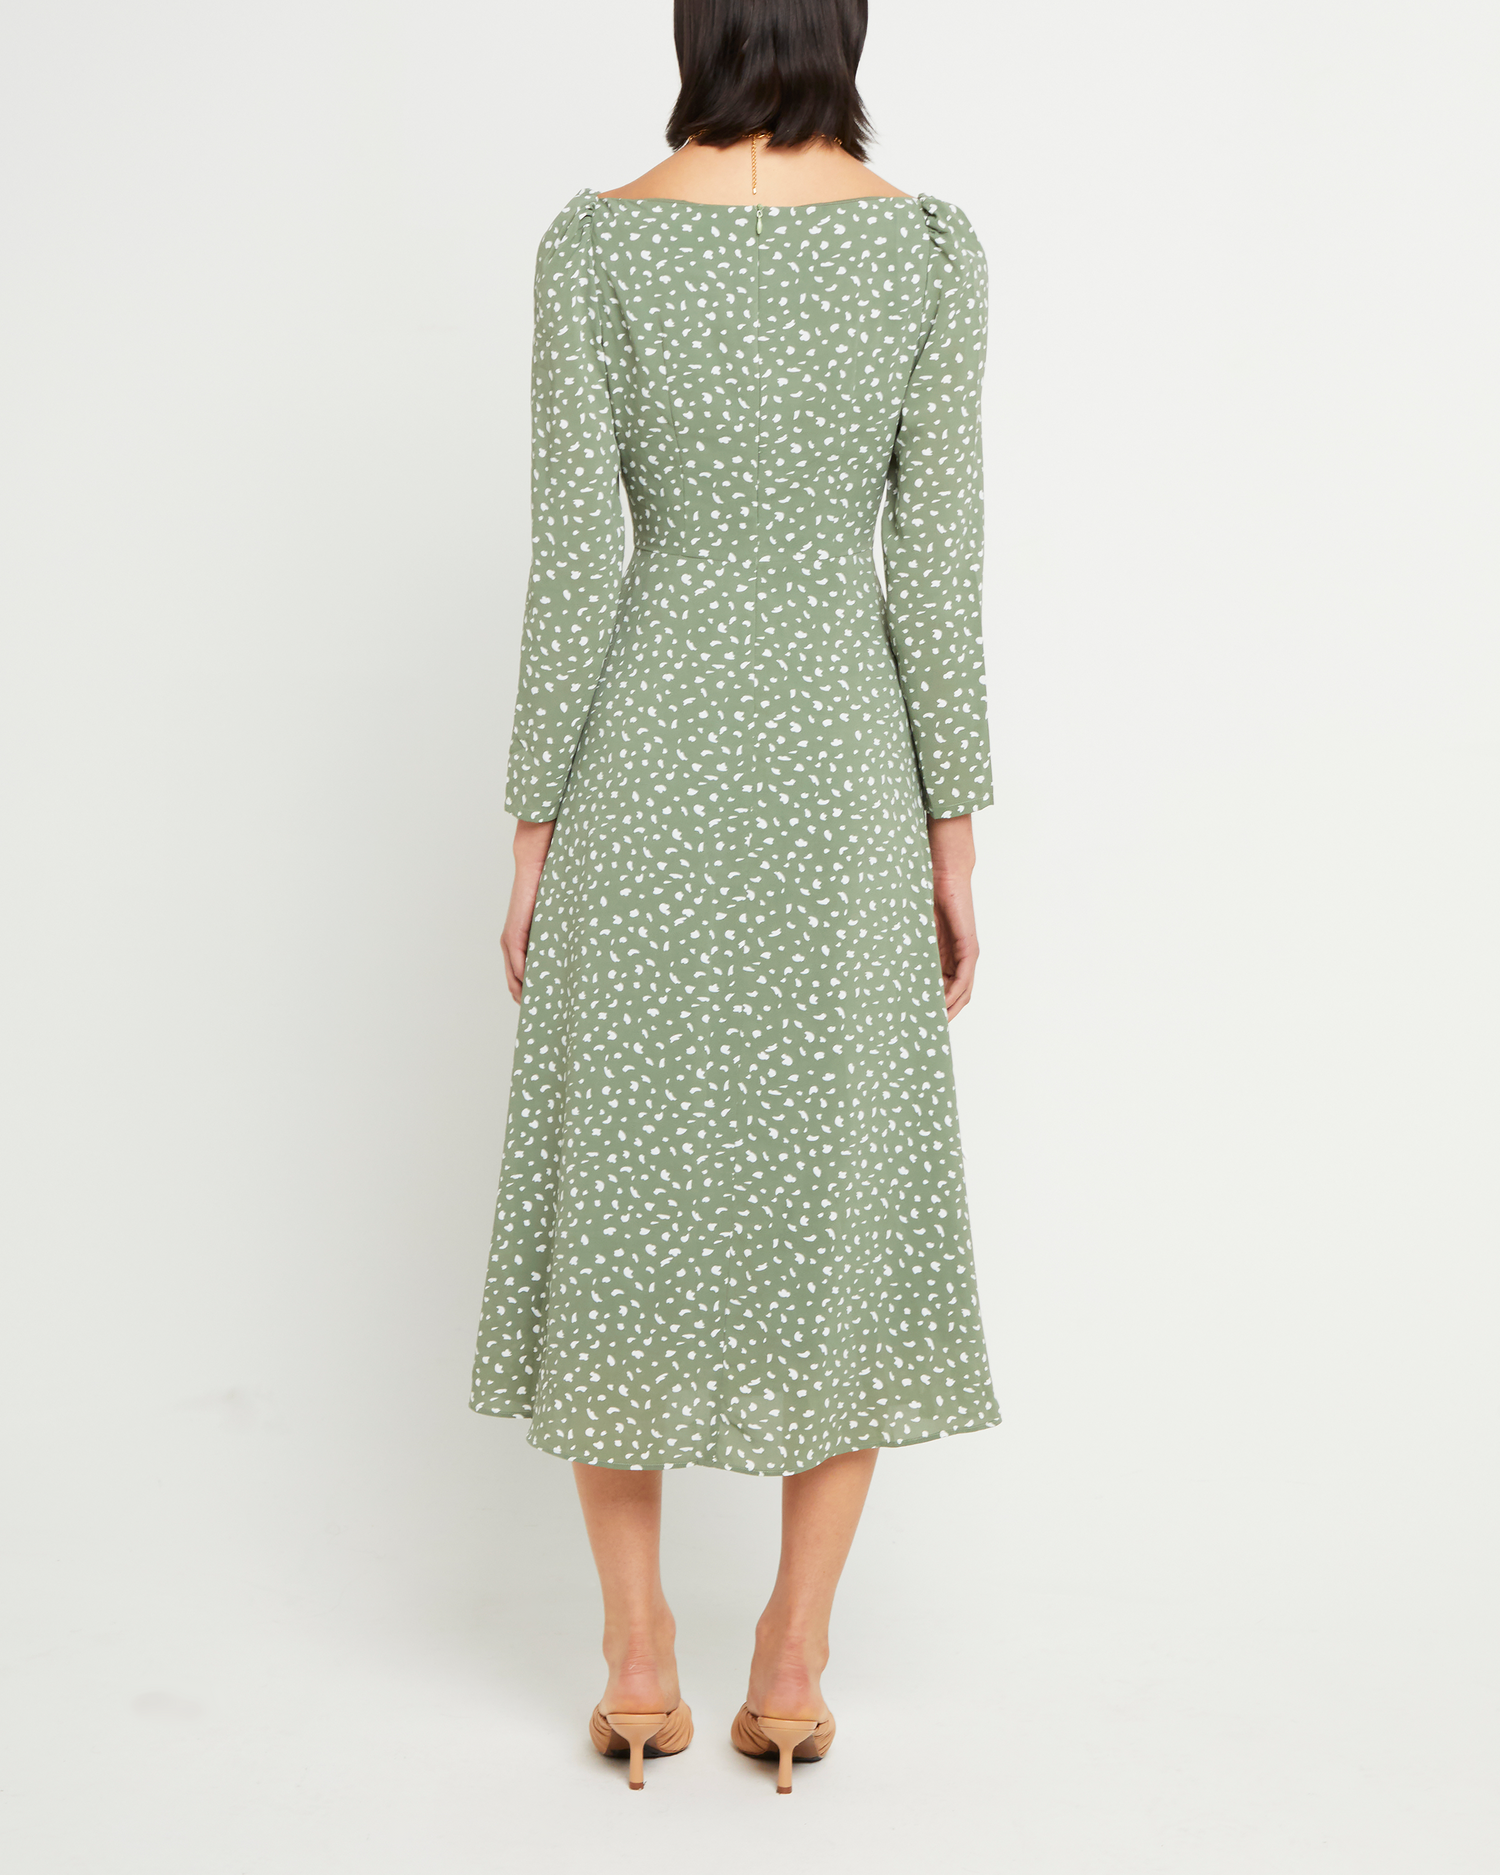 Second image of Crimini Dress, a green midi dress, sweetheart neckline, floral, long sleeves, fitted